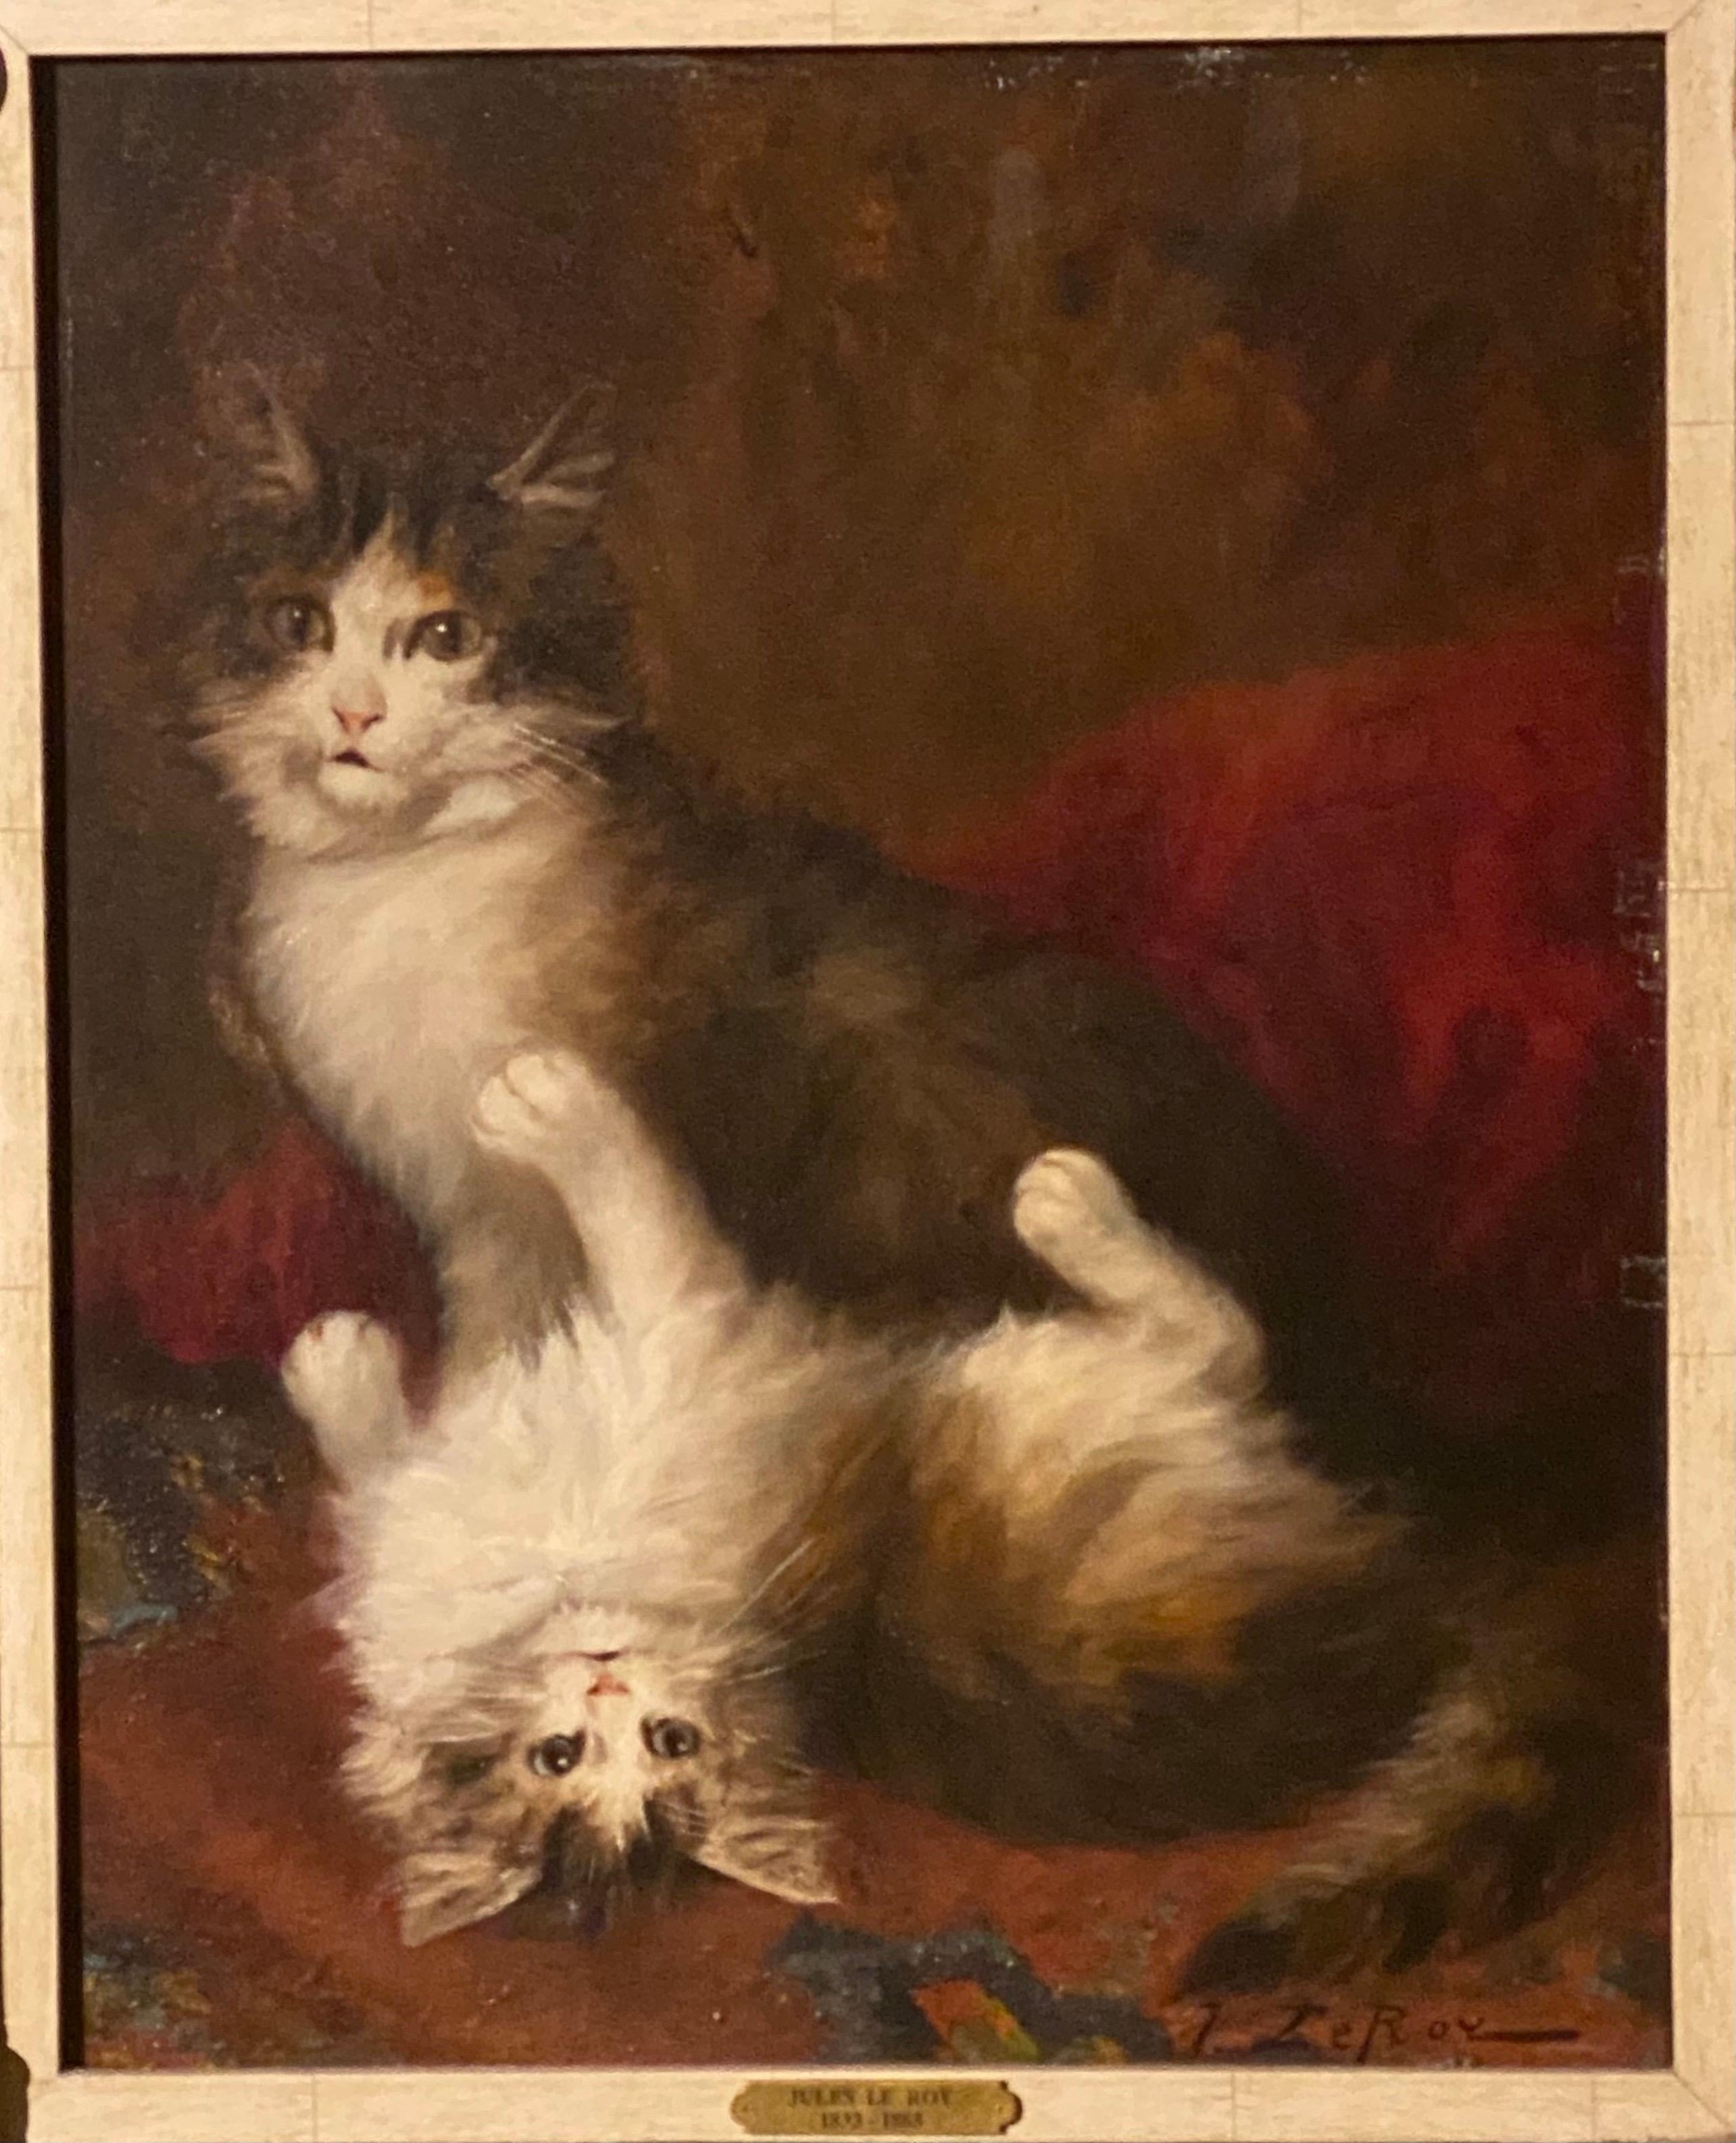 A very nice cat painting by Jules Gustav Le Roy. This is presented in the most fabulous 8 inch wide surround giltwood frame from the 19th century that makes the painting look $1 million. Le Roy Was a painter and not much is known about him, he